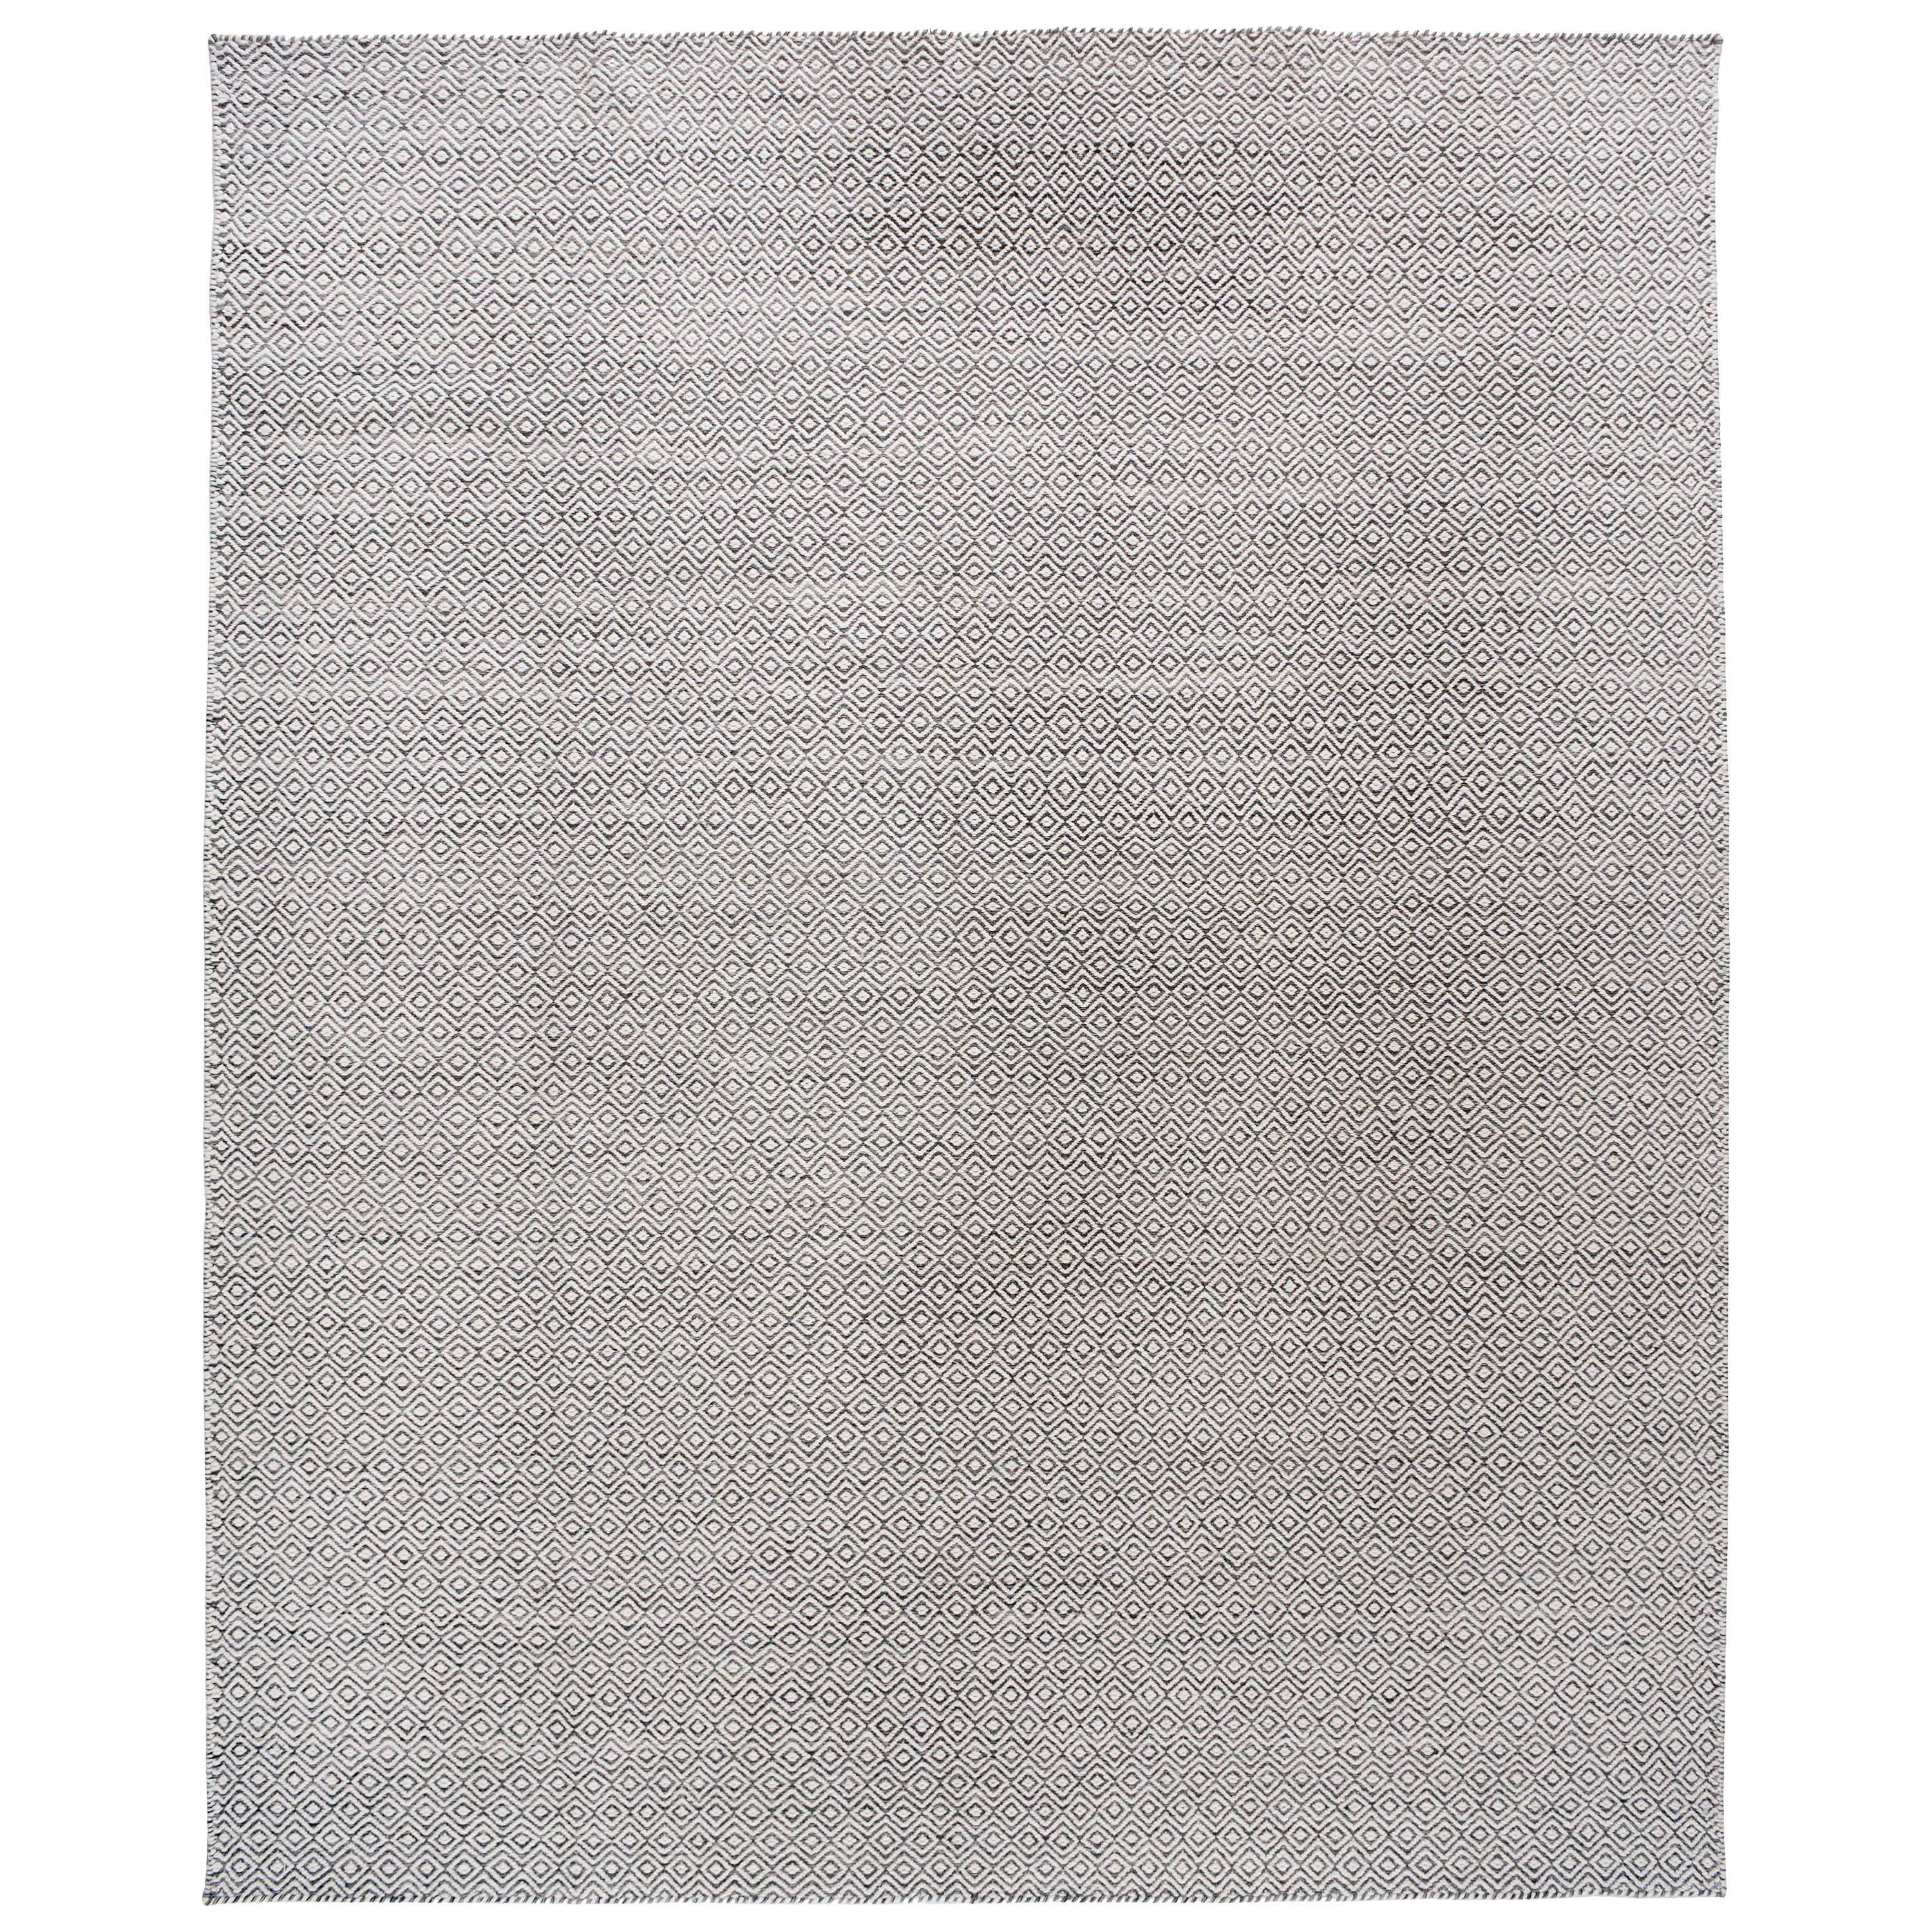 Gray and White Indian Diamonds Rug For Sale